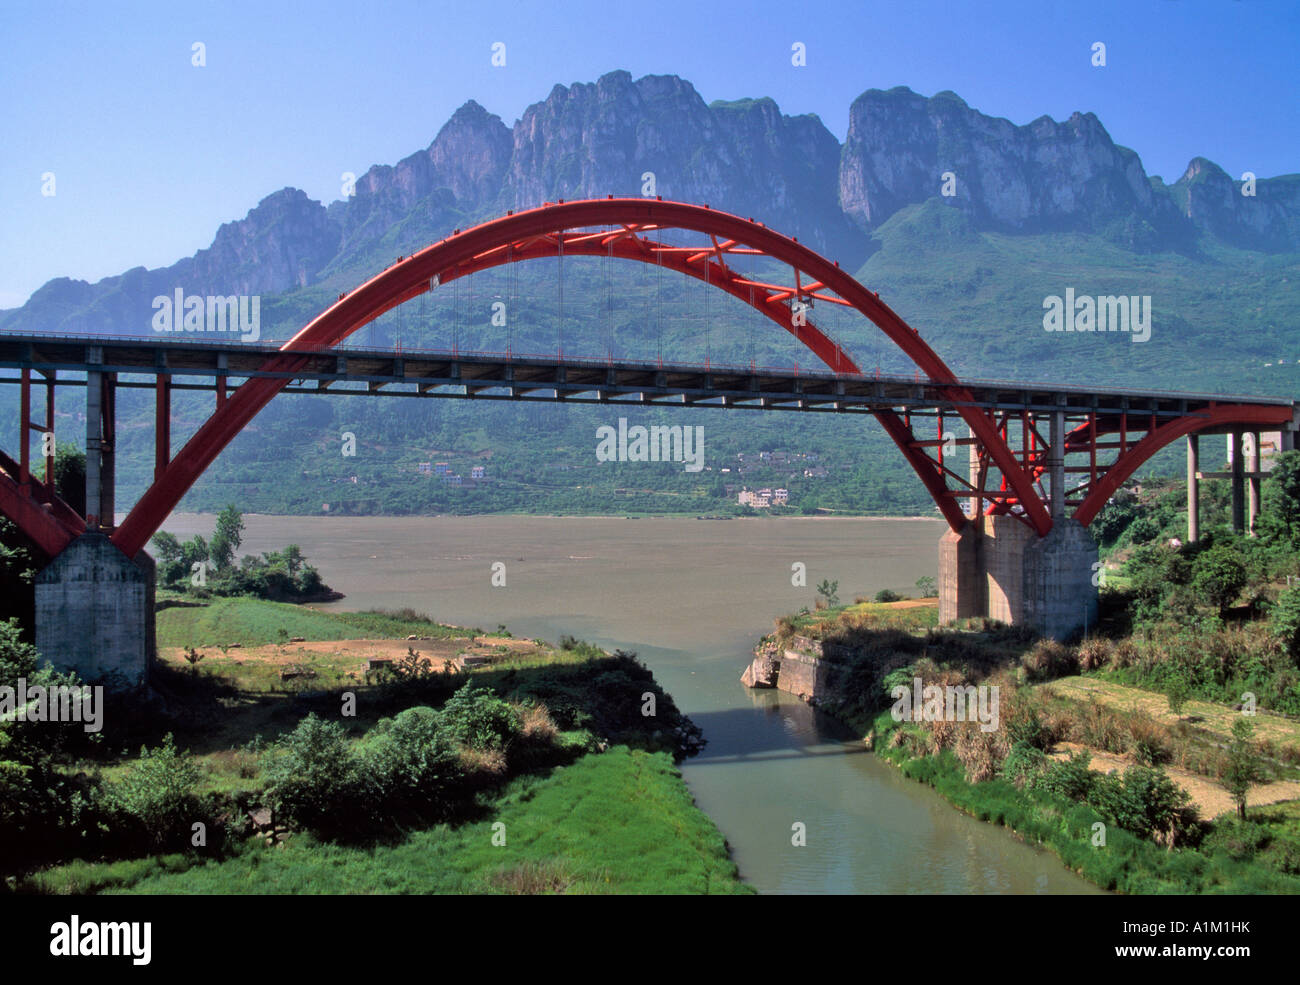 China Hubei Province Yichang building new bridge on the Three Gorges of the Yangtze River Stock Photo